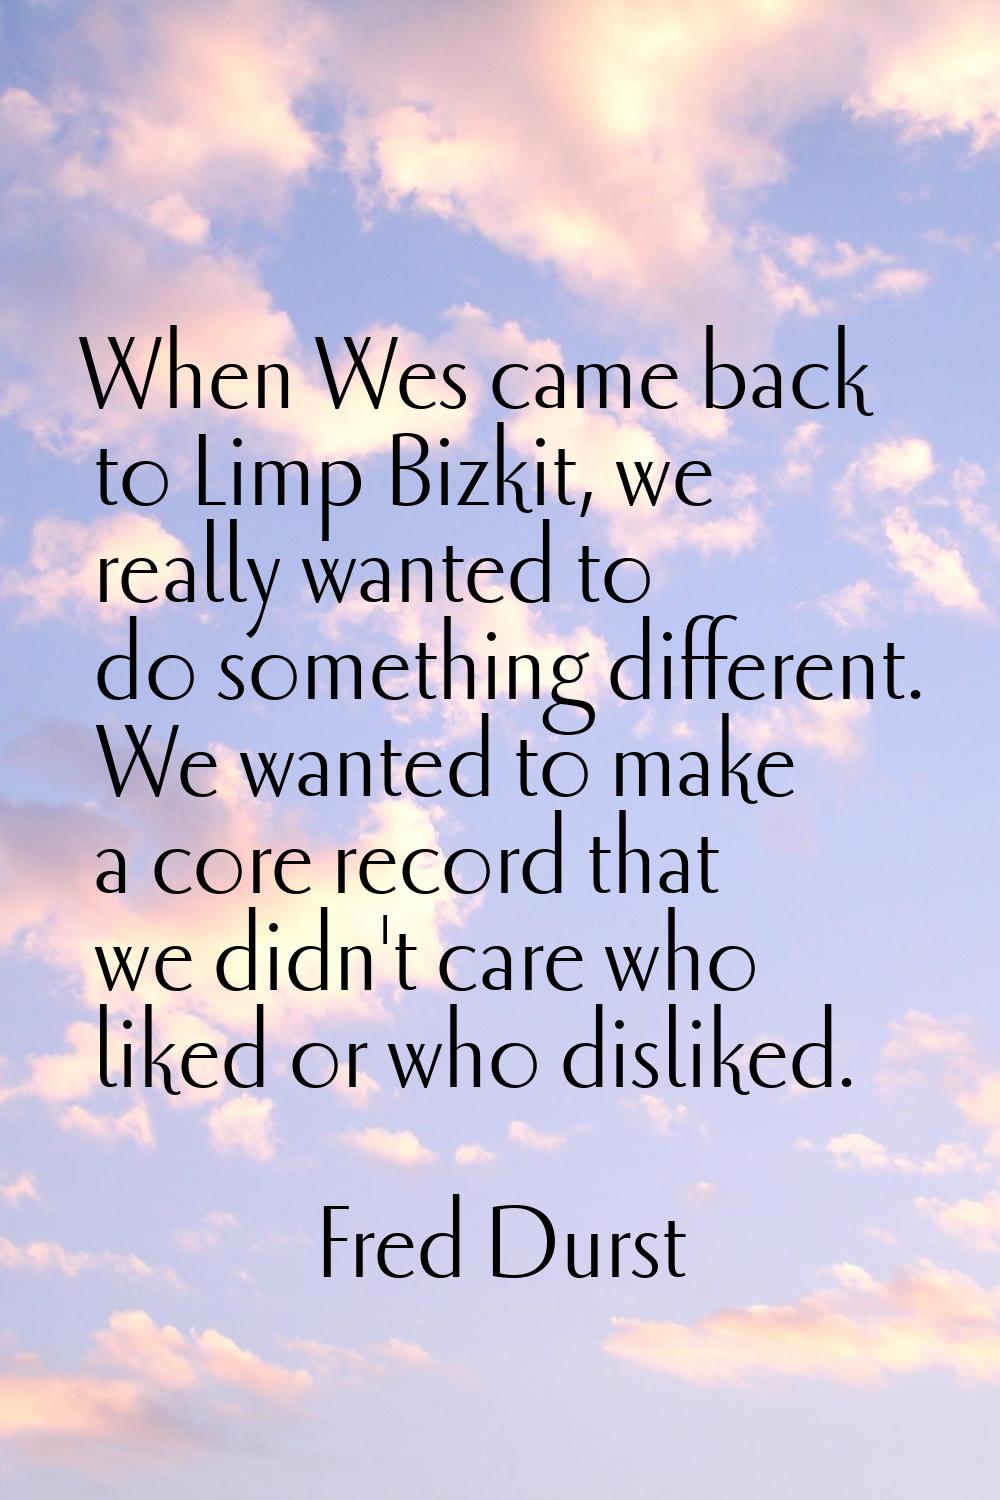 When Wes came back to Limp Bizkit, we really wanted to do something different. We wanted to make a 